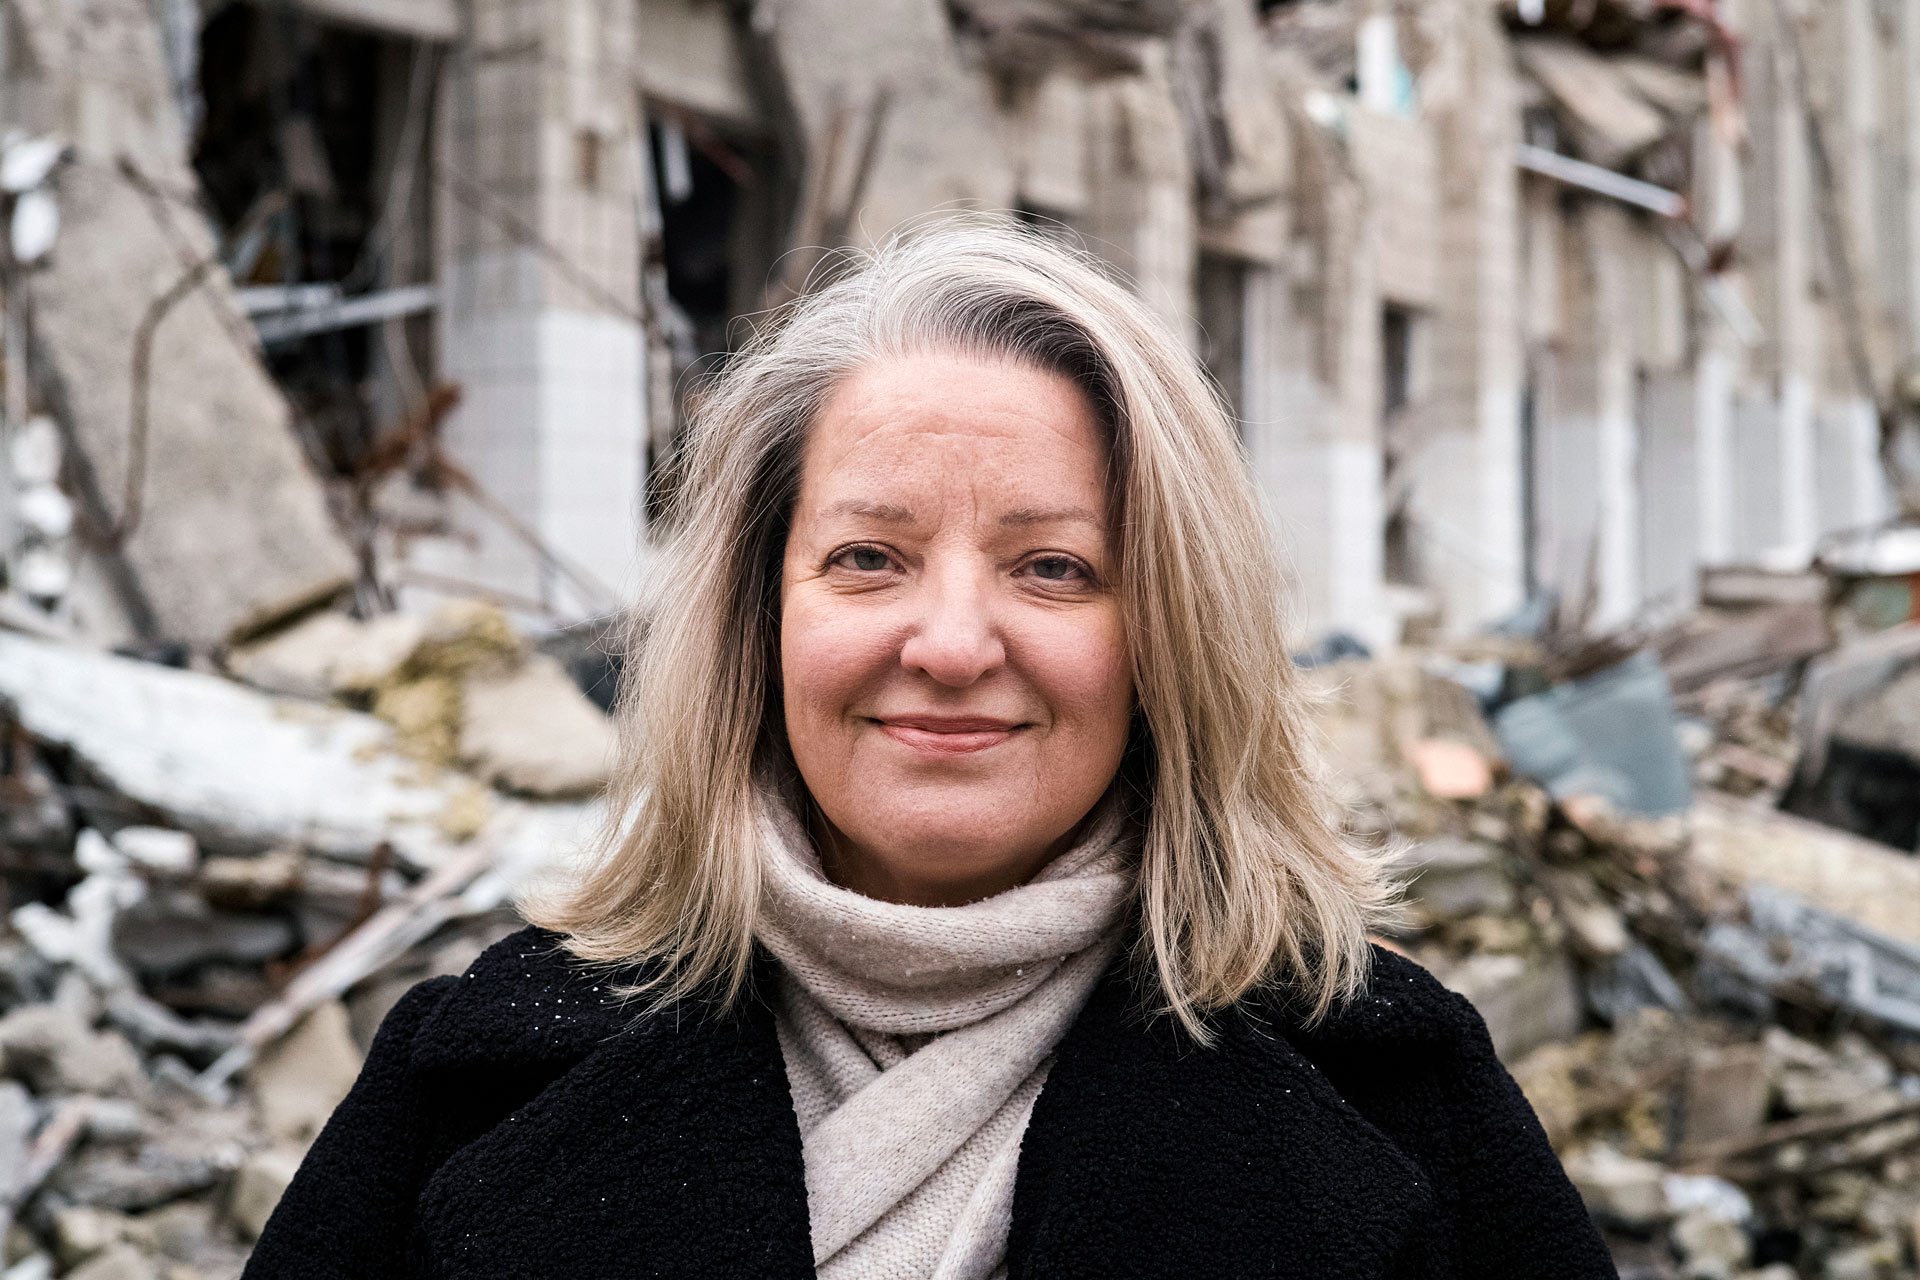 A woman standing in front of a destroyed building smiles at the camera.